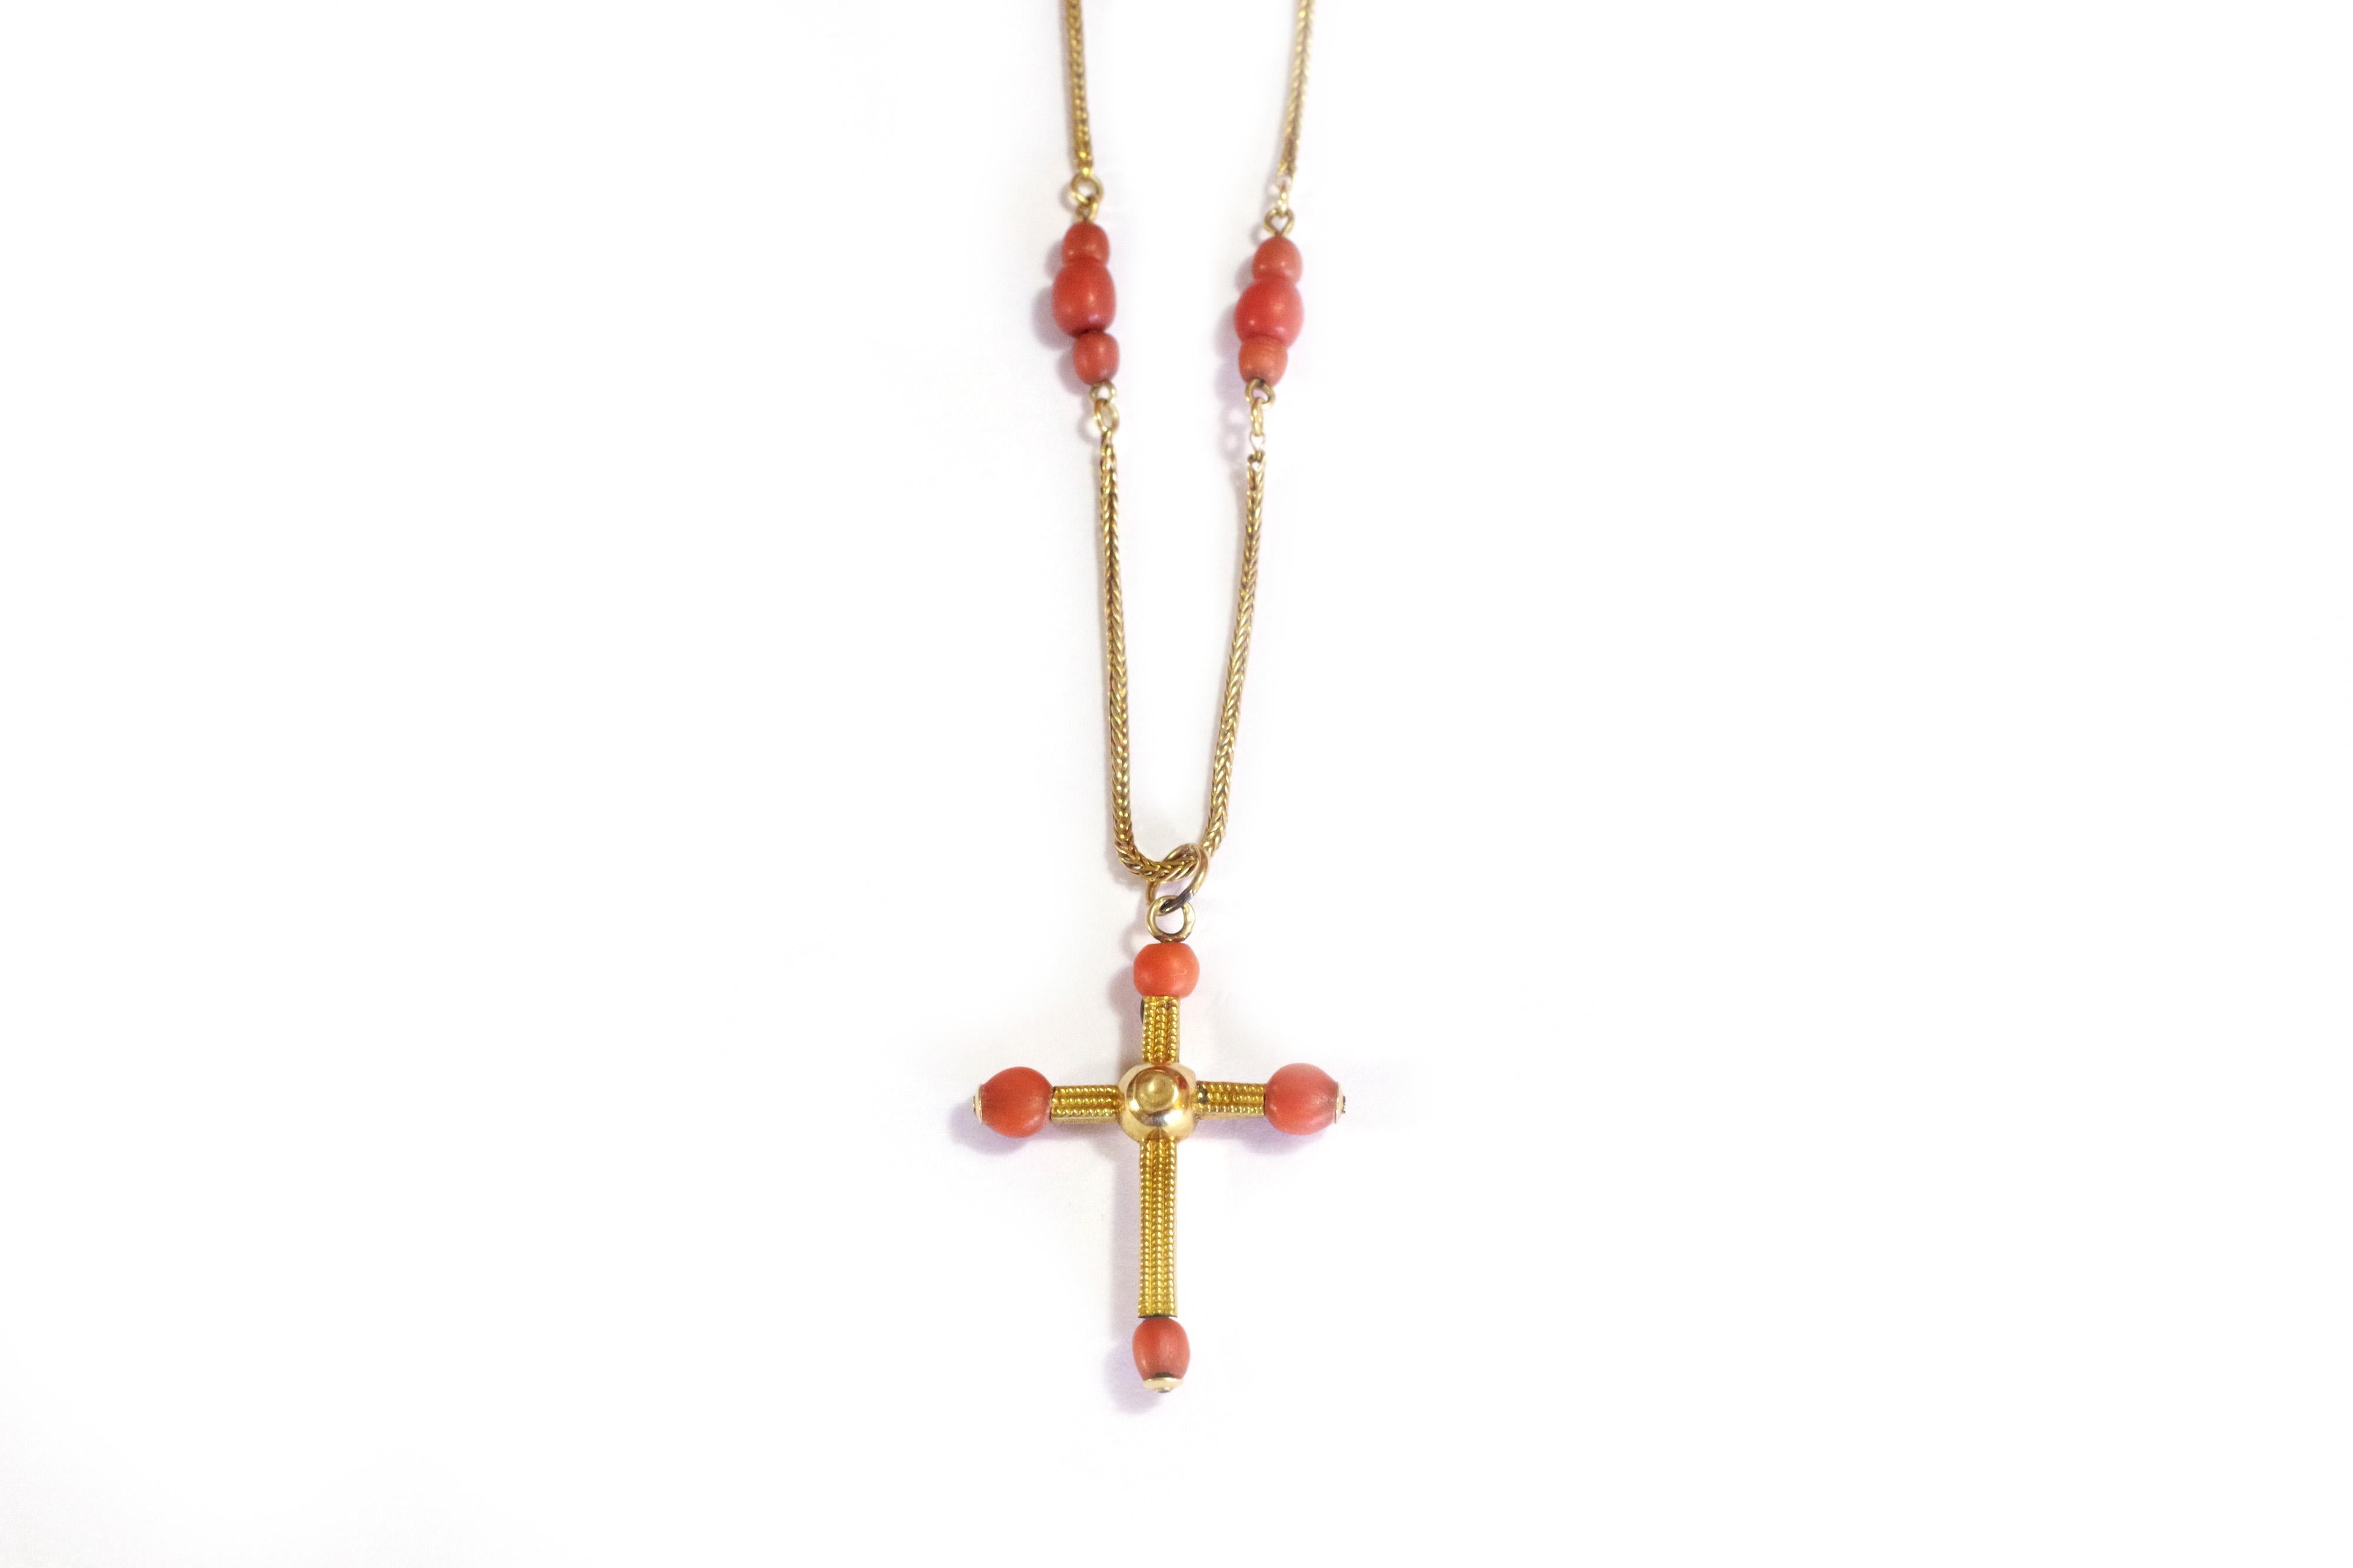 Antique coral cross gold necklace in yellow gold 18 karat. The necklace and its pendant are decorated with coral beads. Each trio of pearls is linked by delicate braided gold chains. The cross is decorated with a millegrain pattern and with a coral